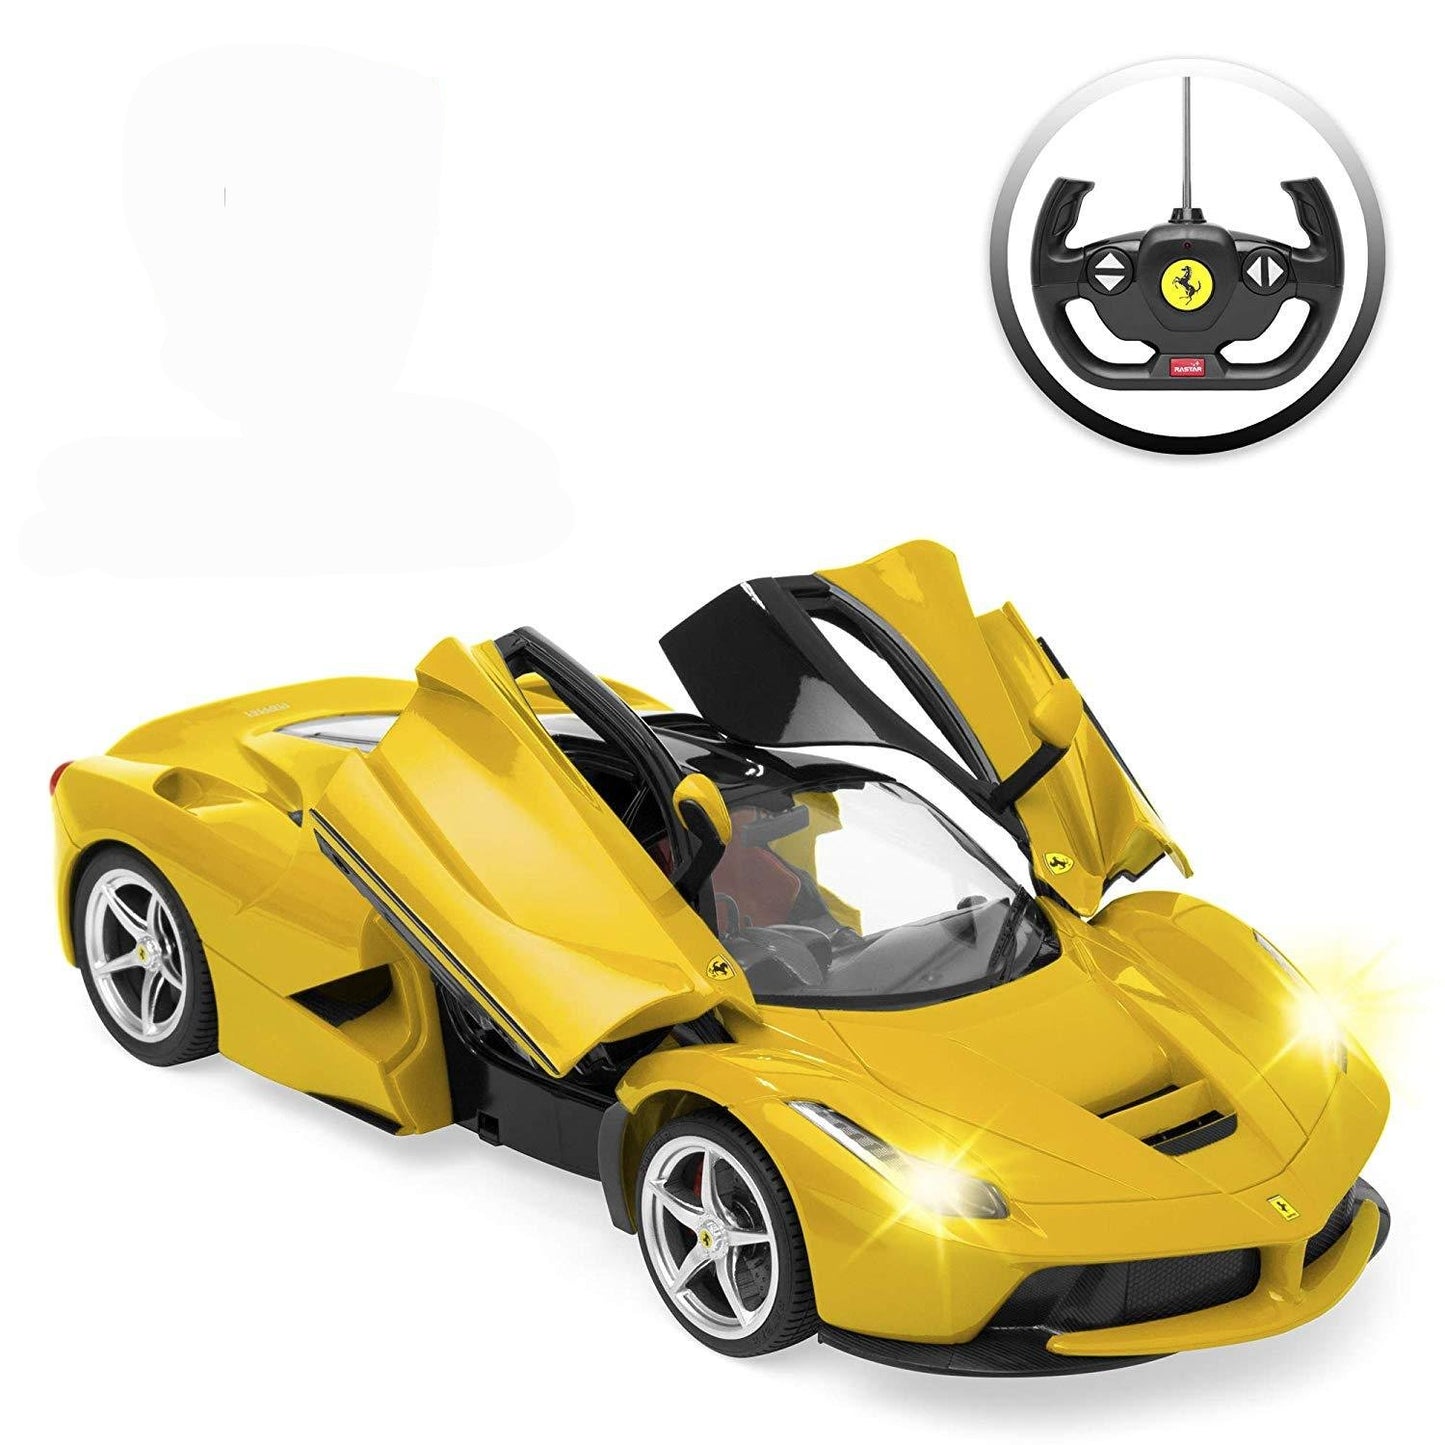 27 MHz 1/14 Scale Kids Licensed Ferrari Model Remote Control Play Toy Car w/ Functioning Headlights, Taillights, Doors, 5.1 MPH Max Speed